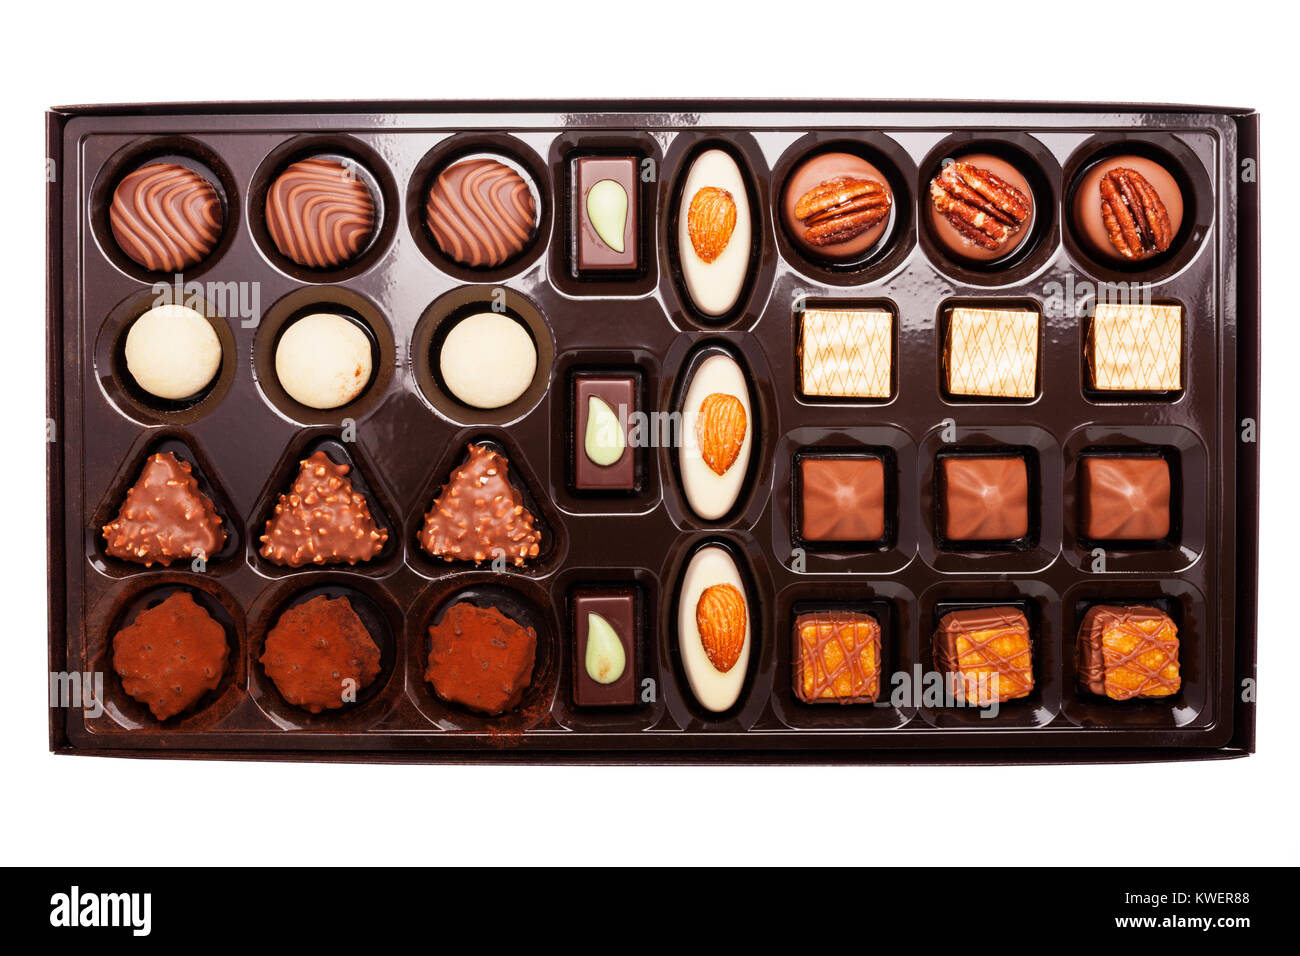 A box of M&S Swiss Chocolates on a white background Stock Photo